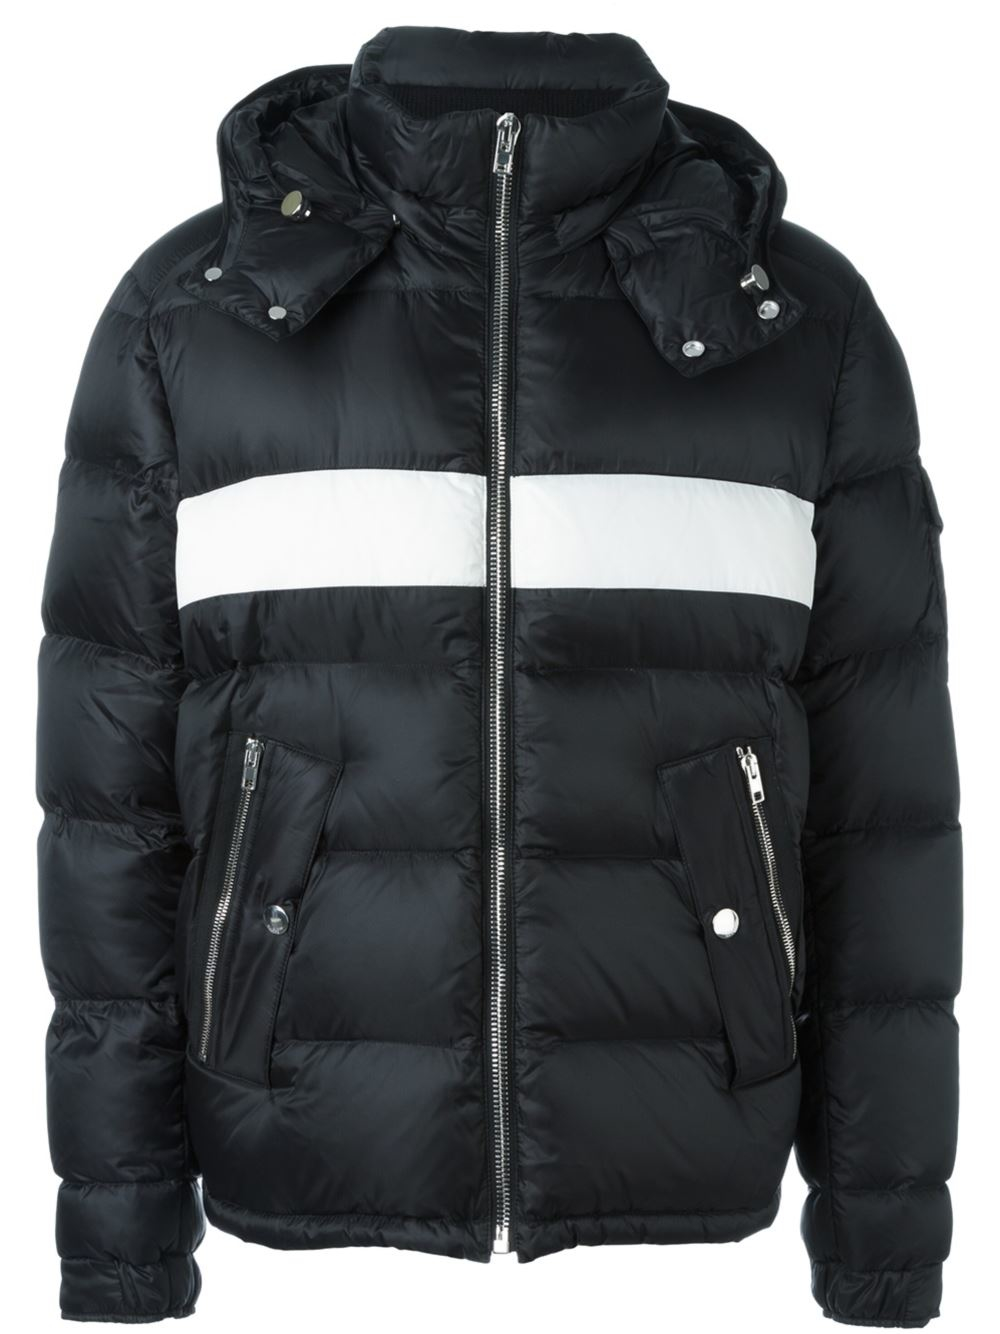 Givenchy Colour Block Padded Jacket in Black for Men - Lyst